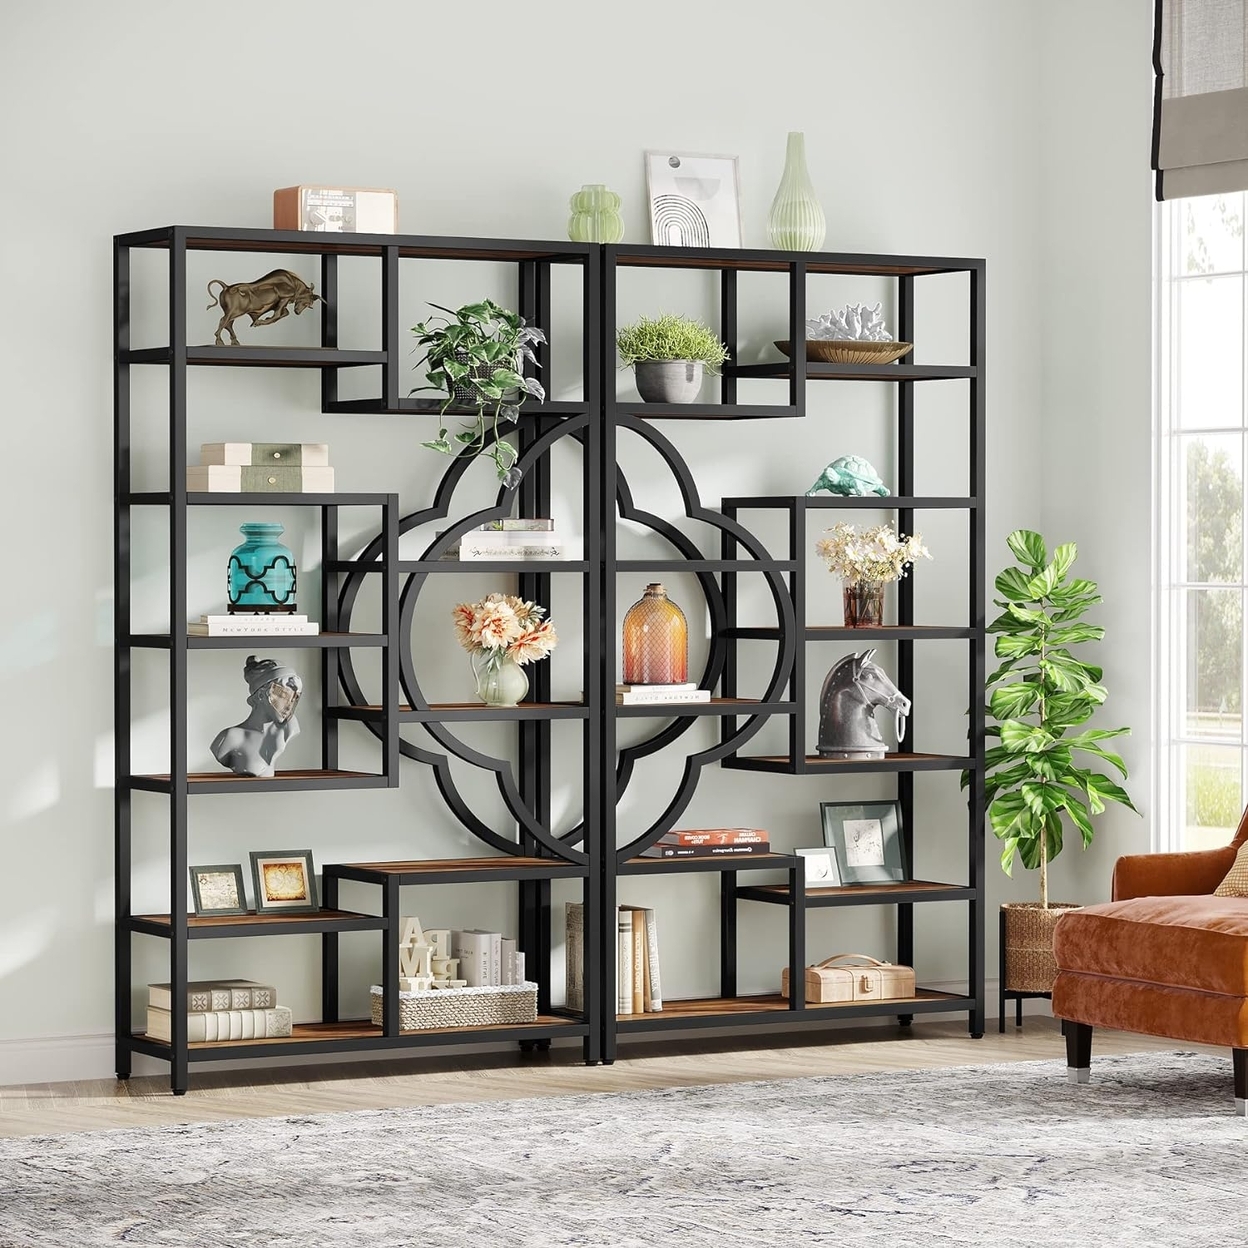 Tribesigns Bookshelf, 11-Shelves Tall Bookcase With Unique Arc-Shaped Design, Industrial Etagere Display Storage Shelves - 2pcs